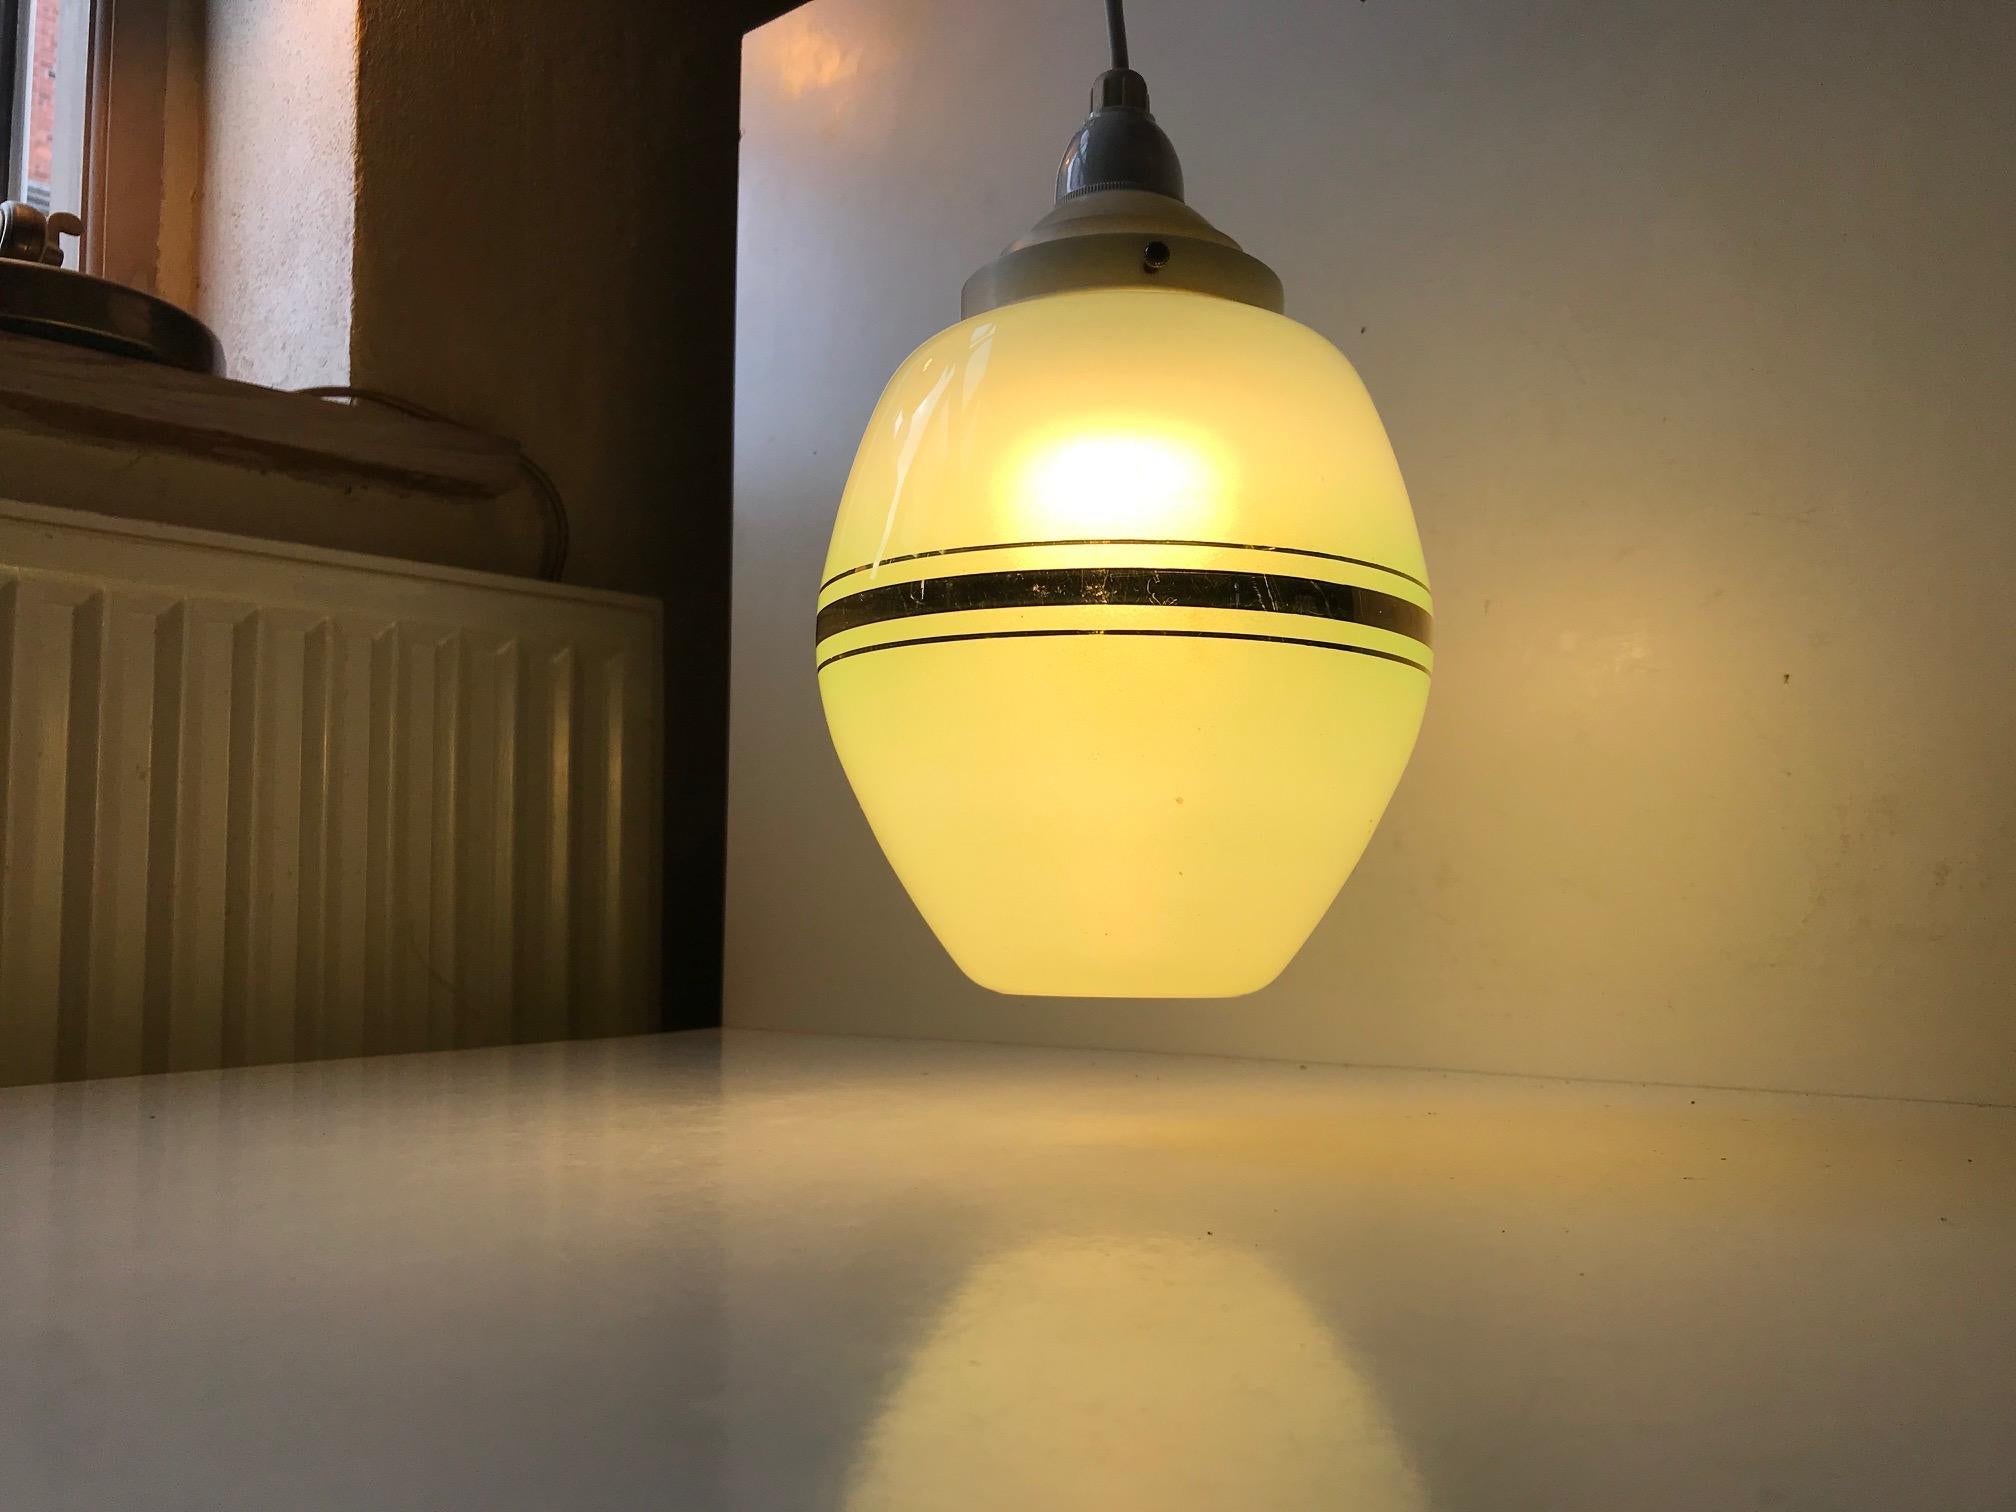 Small organically shaped hanging lamp composed of white and green opaline glass with gold foliage stripes and original Bakelite top and socket. It was manufactured by Lyfa in Denmark during the 1930s or 1940s. Imprint from Lyfa to the socket.